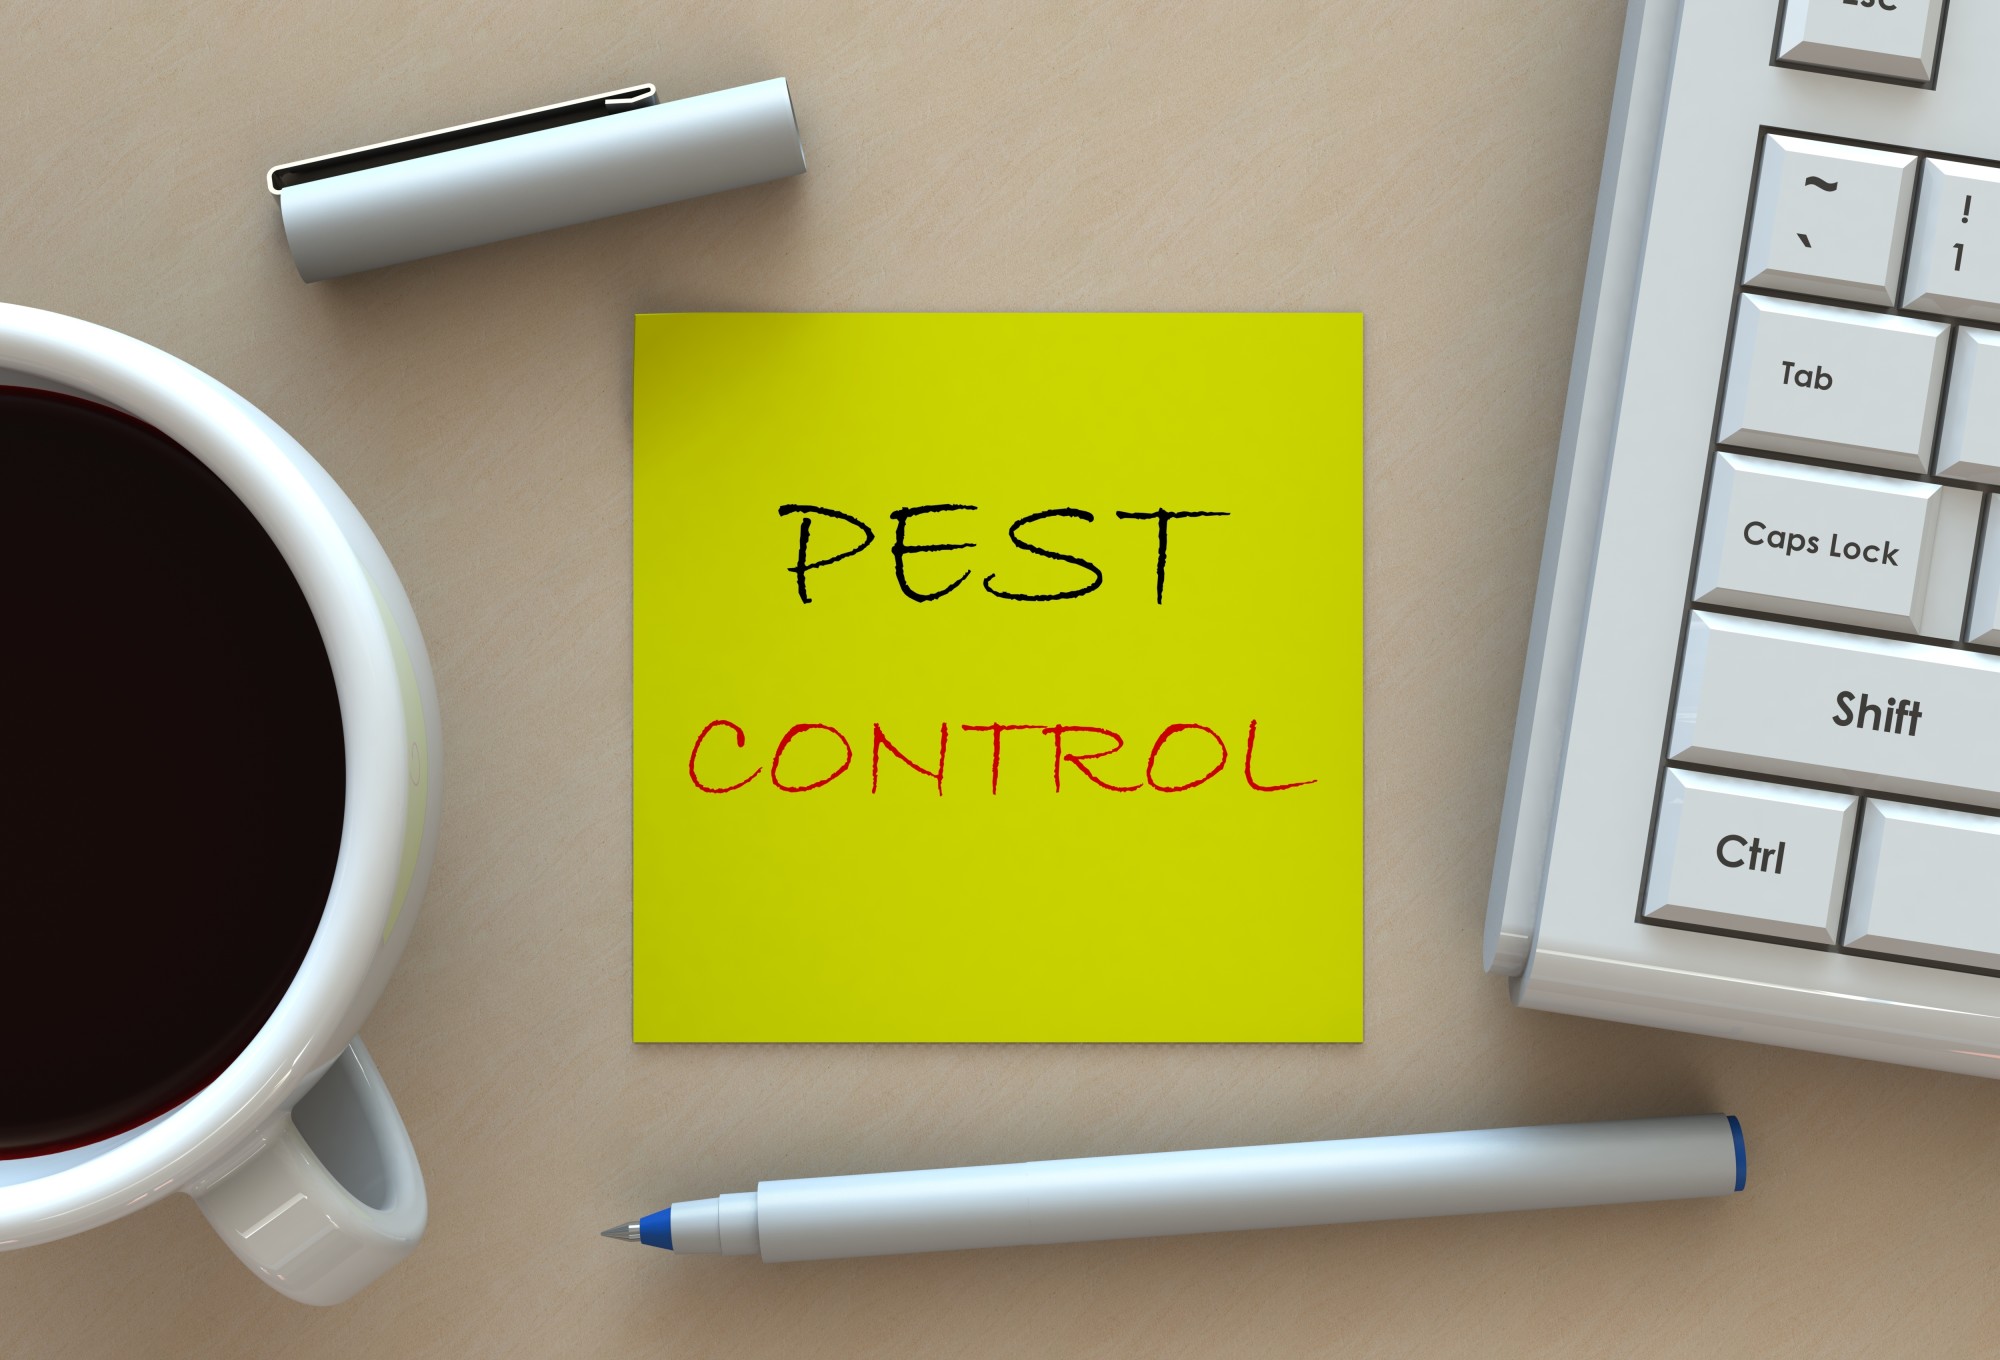 Are you struggling to get rid of pests around the house? Here's a quick homeowner's guide on pest control and how to keep your home protected.